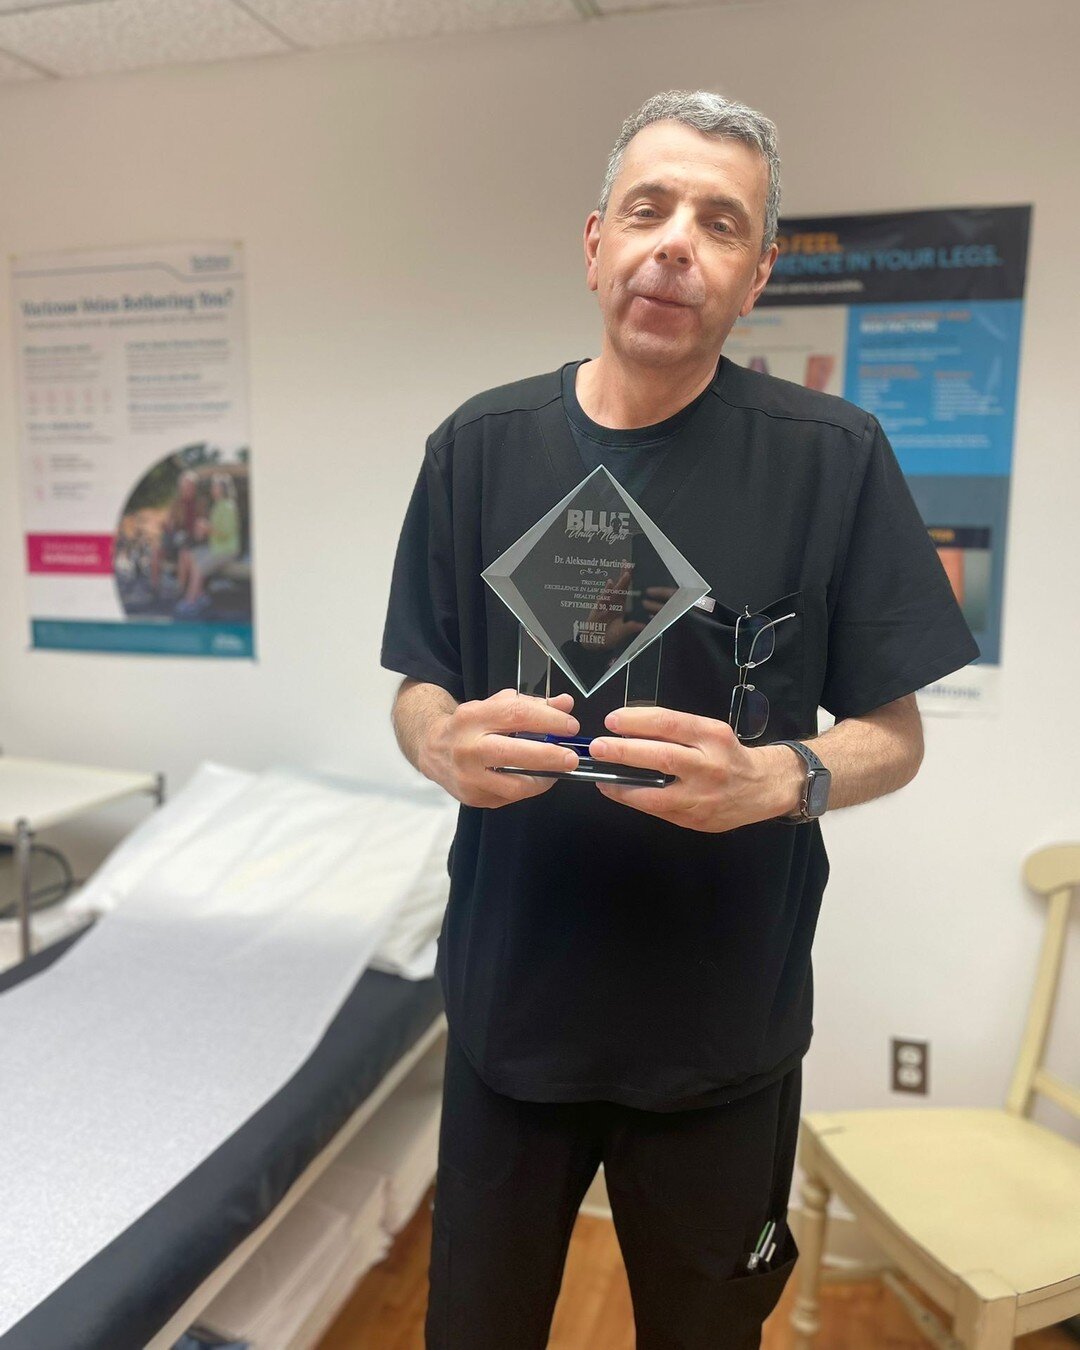 Congratulations to our very own Dr. Alex for earning the Blue Unity Night Excellence in Law Enforcement Health Care Award! 🥳🙌

#Tristate #WeAreBlue